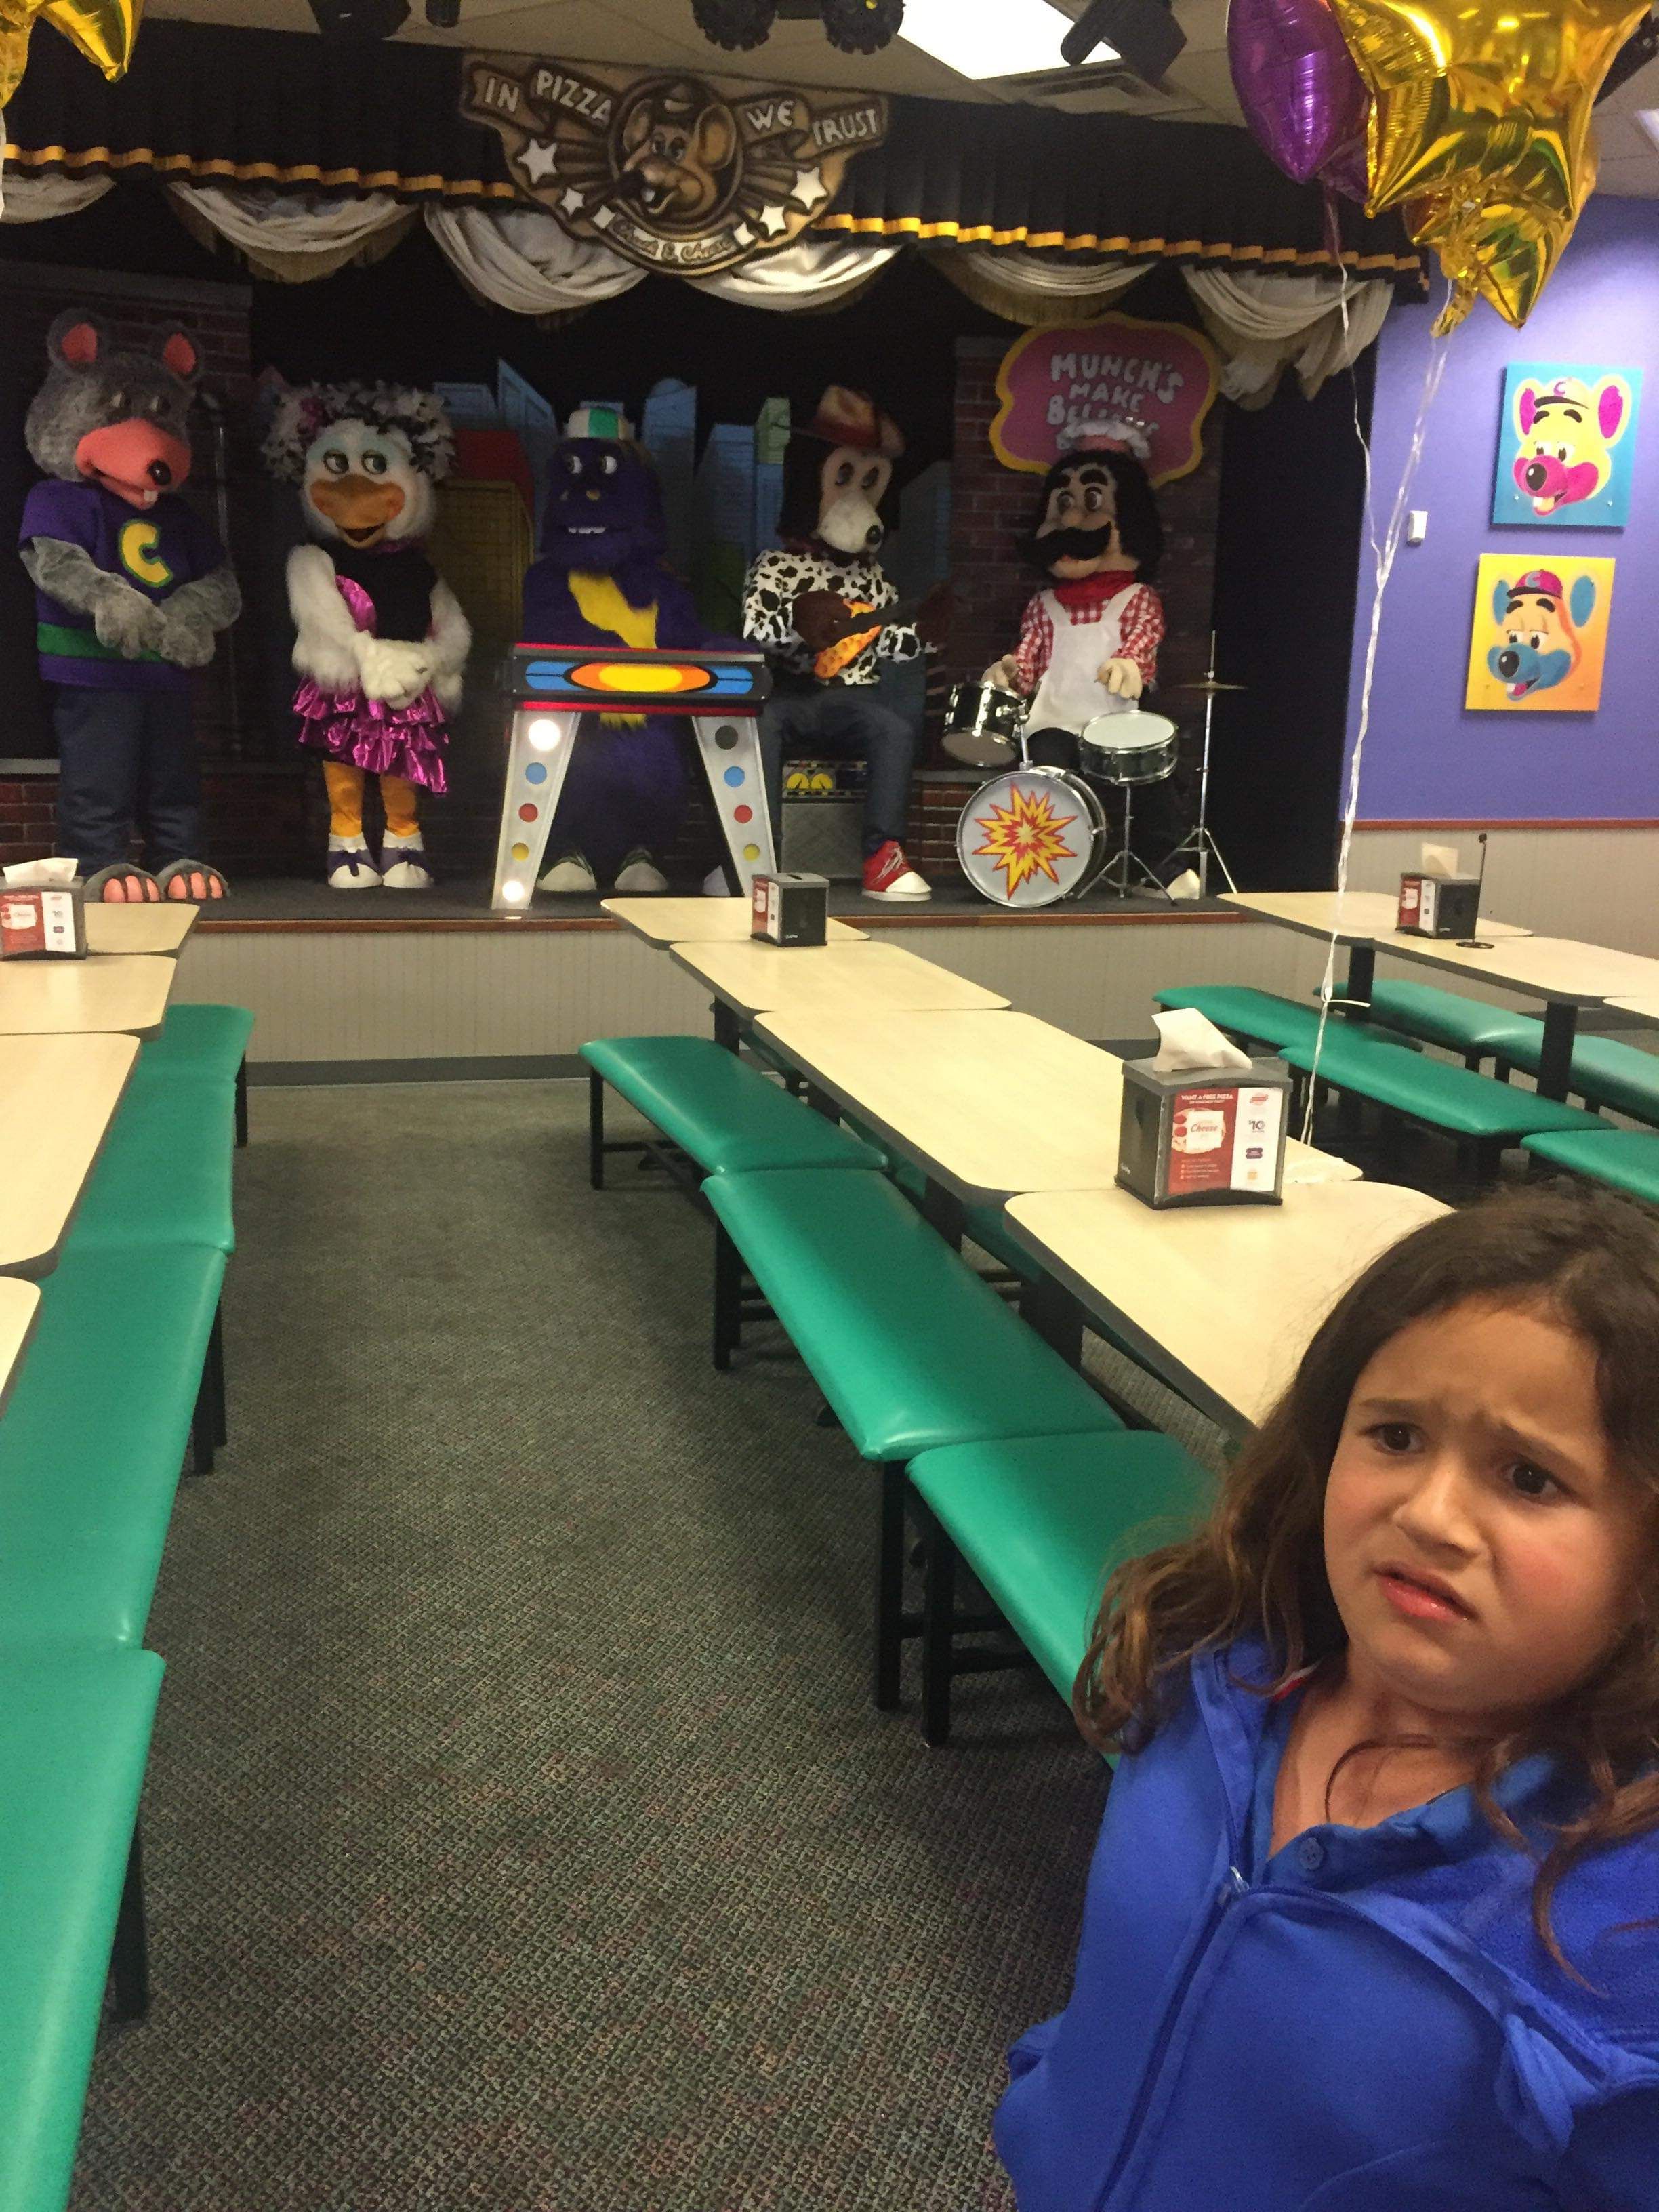 My girlfriends niece went to Chuck E. Cheese for the first time...